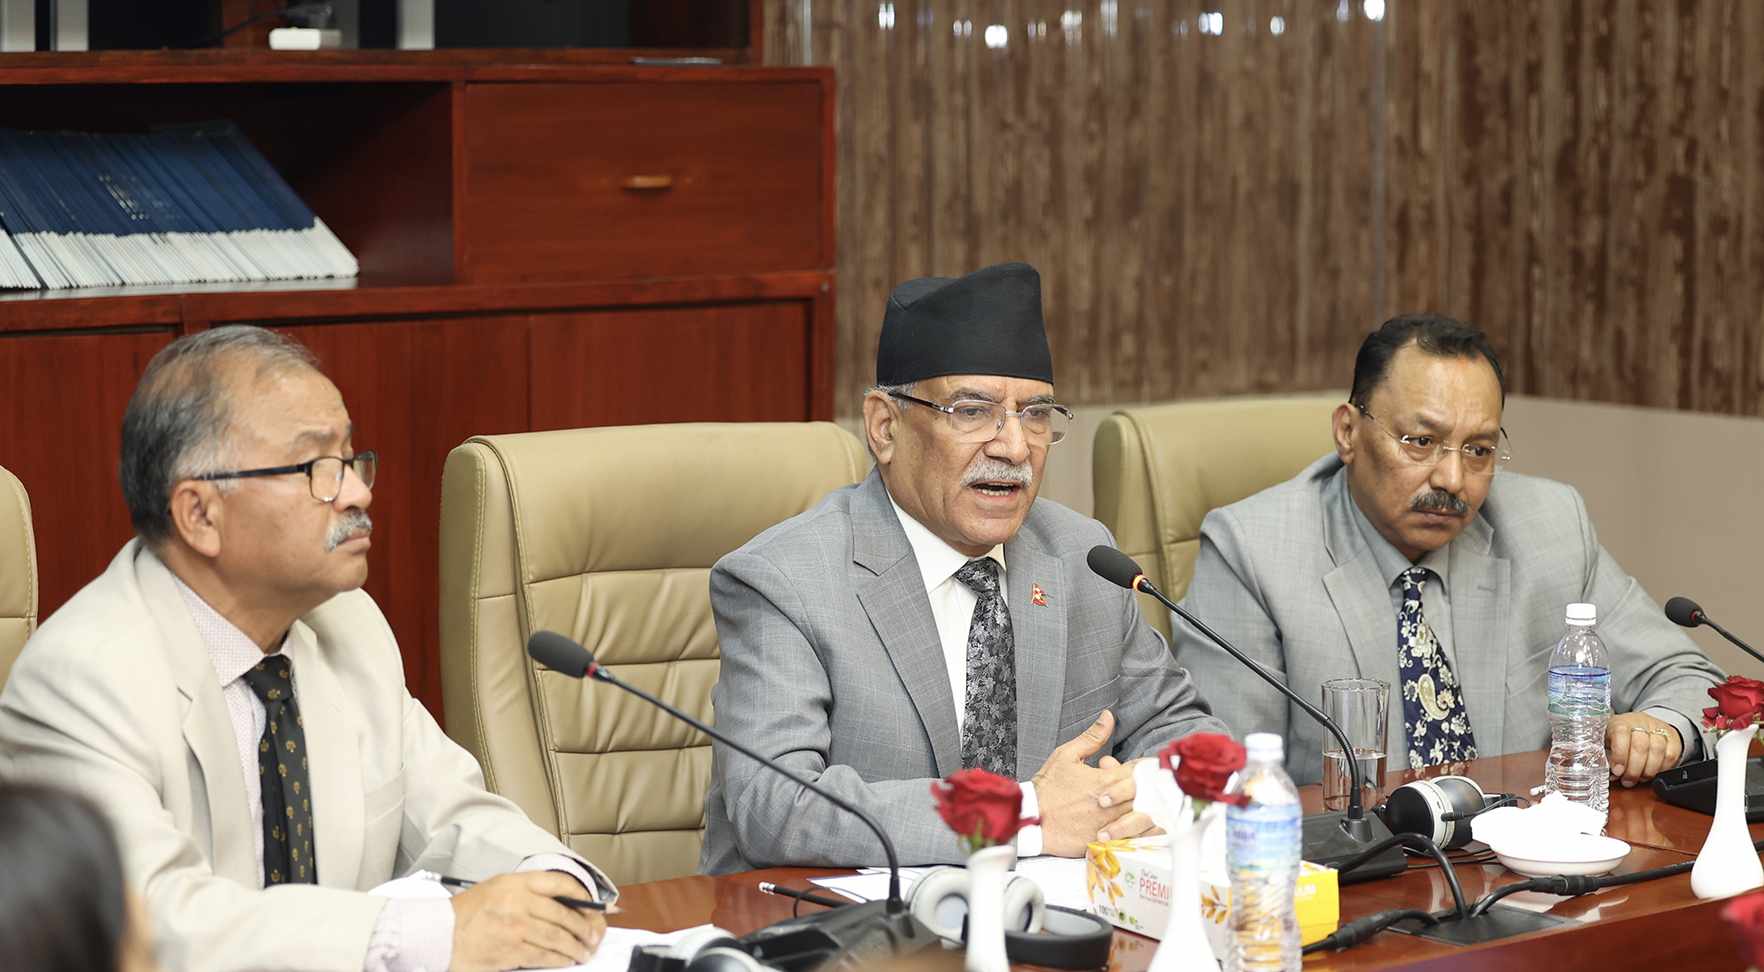 Prime Minister Dahal vows continued crackdown on corruption, irrespective of time period